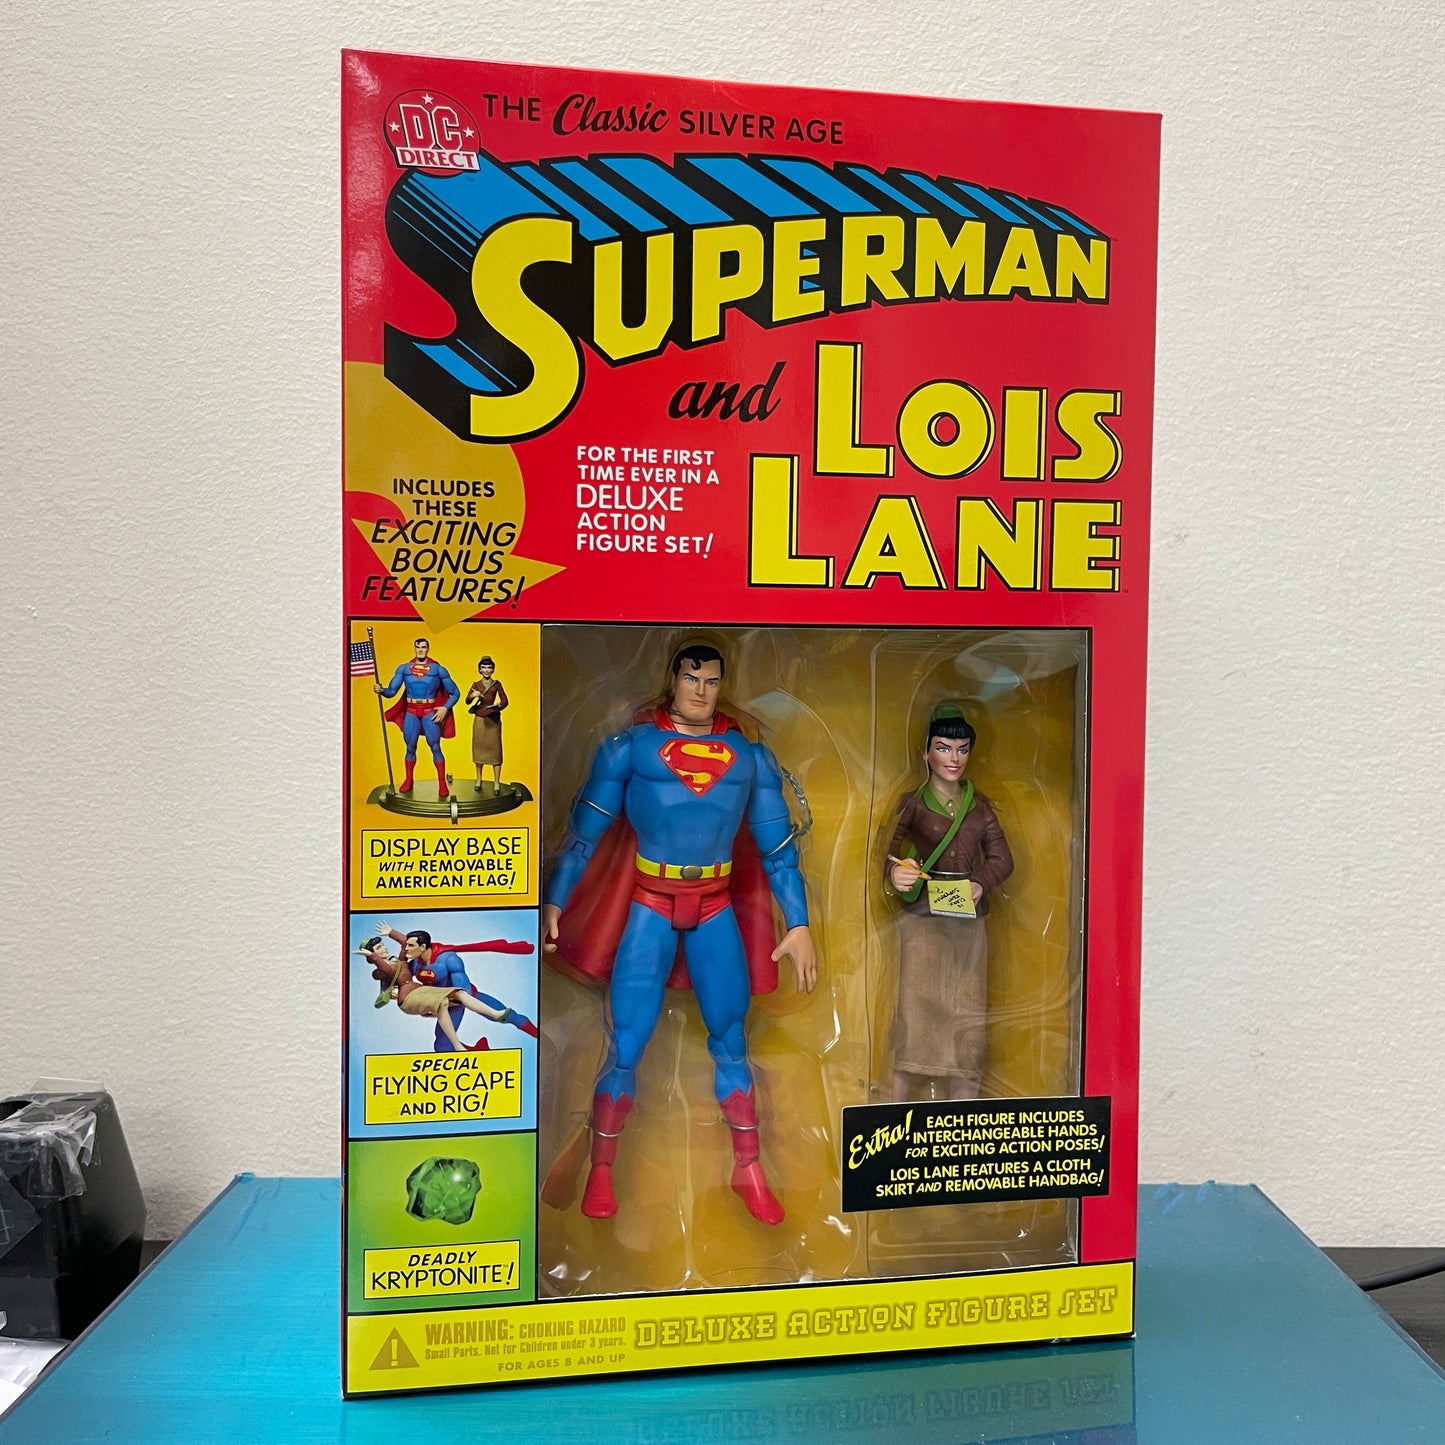 DC Direct The Classic Silver Age Superman and Lois Lane Deluxe Action Figure Set